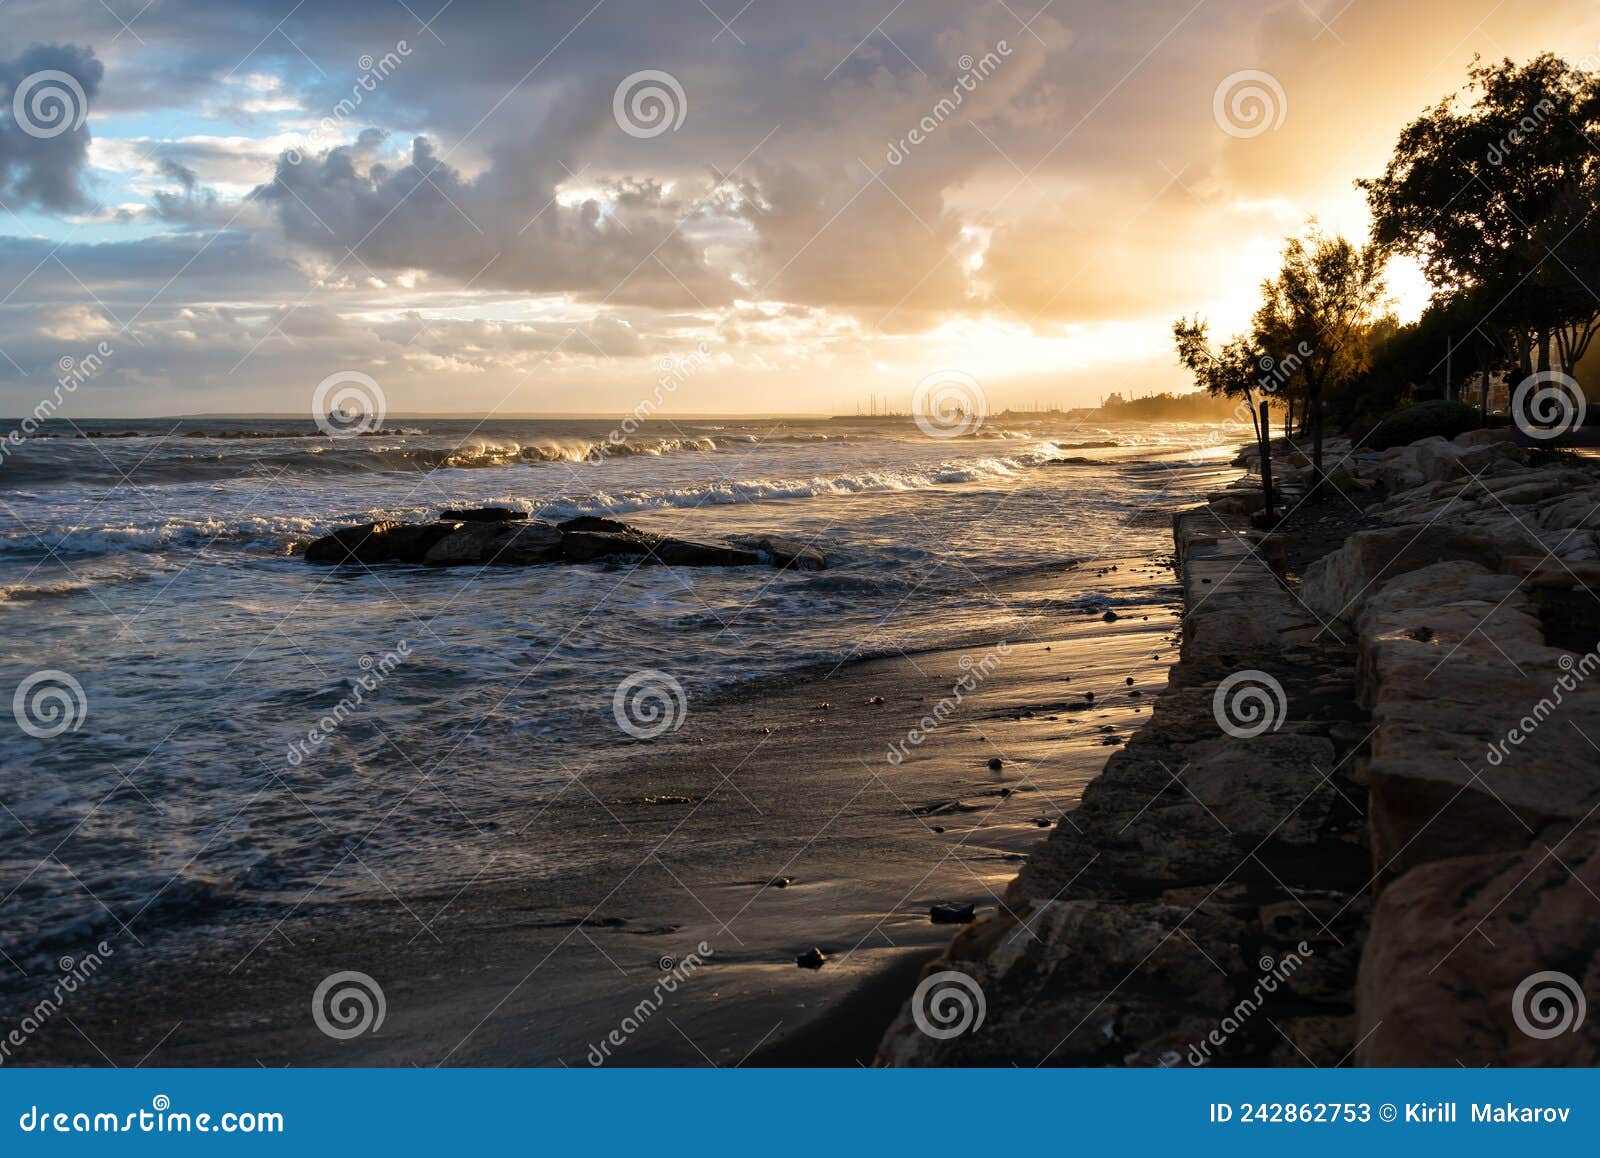 Golden Sea Limassol Photos - Free  Royalty-Free Stock Photos from  Dreamstime